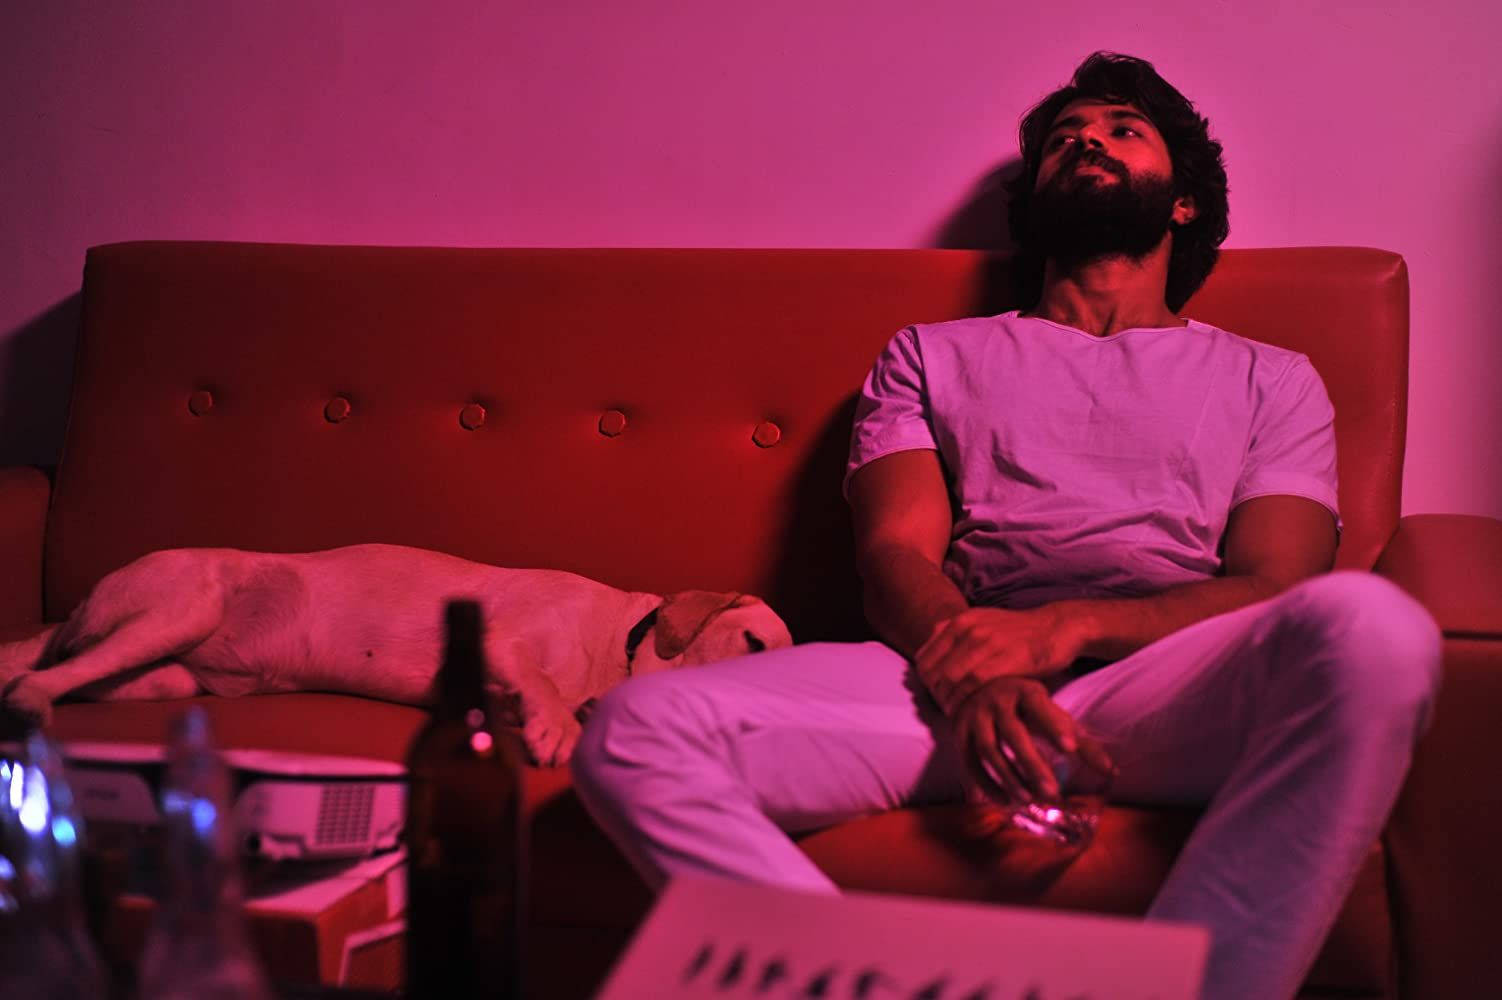 Striking Portrait Of Arjun Reddy From The Acclaimed Movie, Illuminated In Pink Light Background